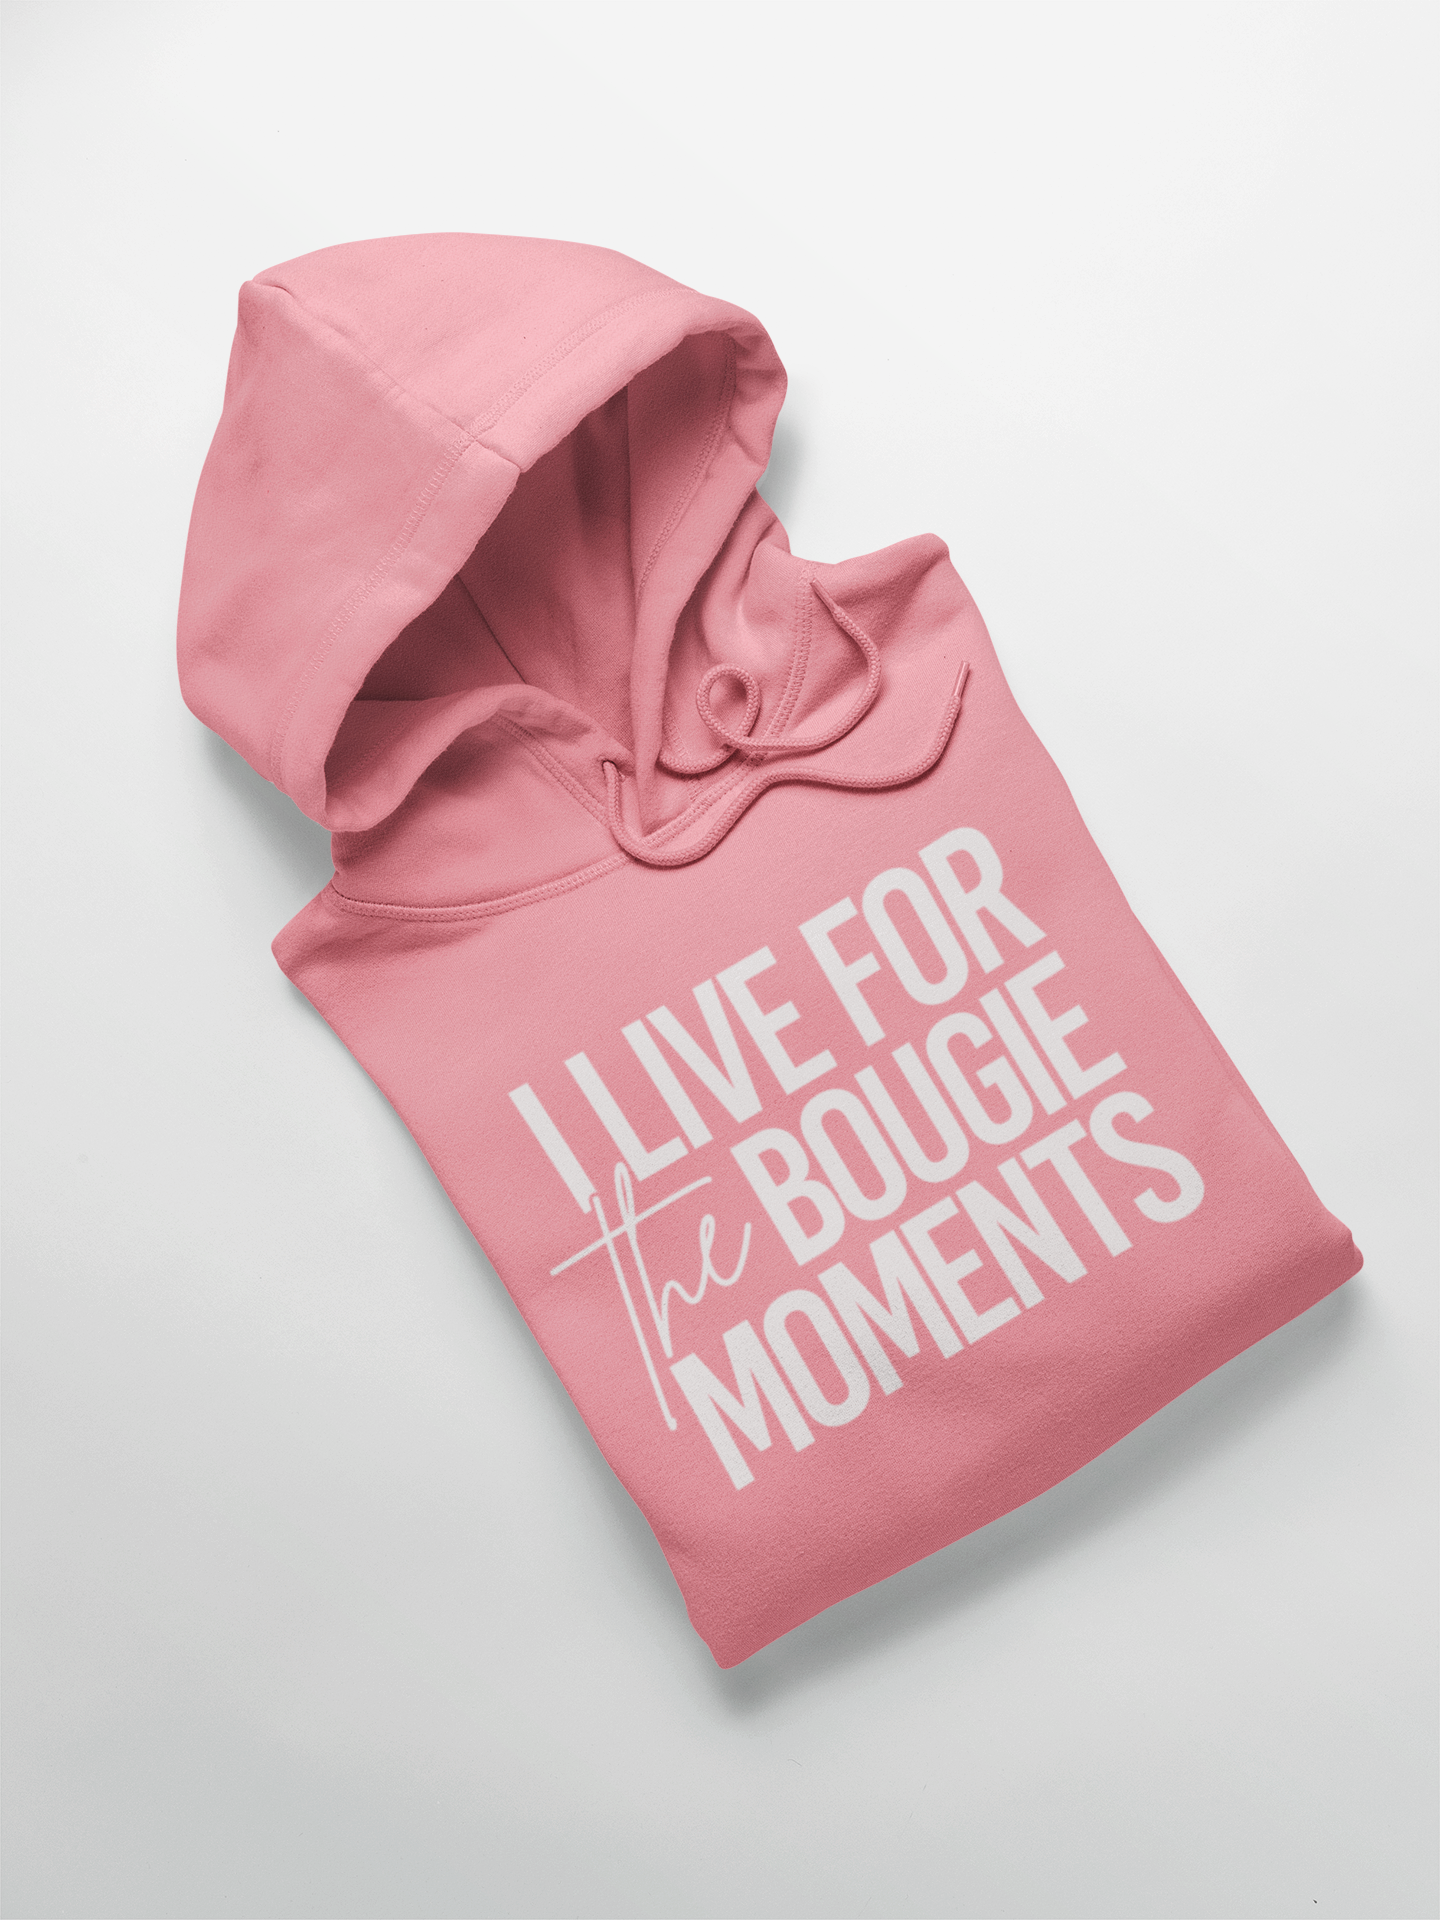 I Live for the Bougie Moments Hooded Sweatshirt